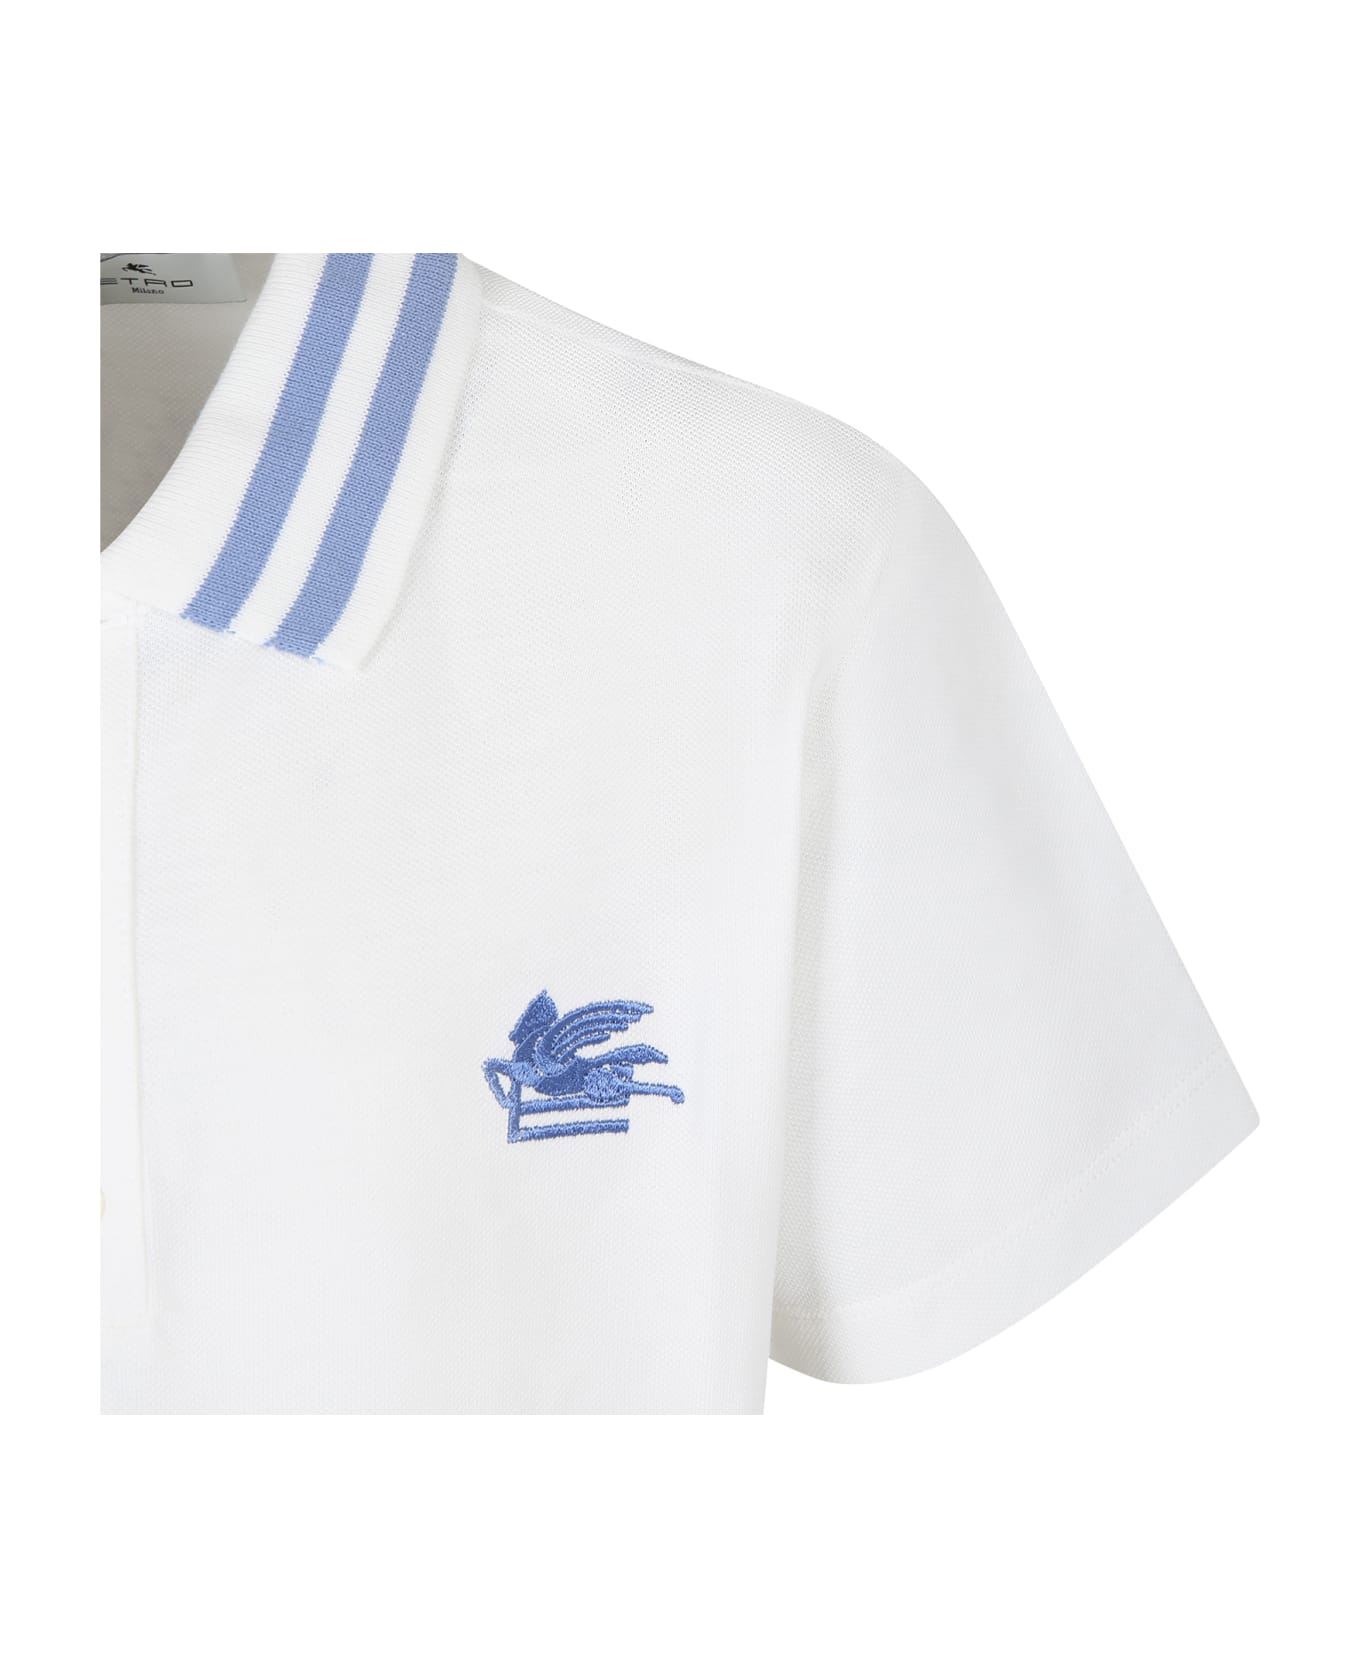 Etro Ivory Polo Shirt For Boy With Pegasus - Ivory Tシャツ＆ポロシャツ